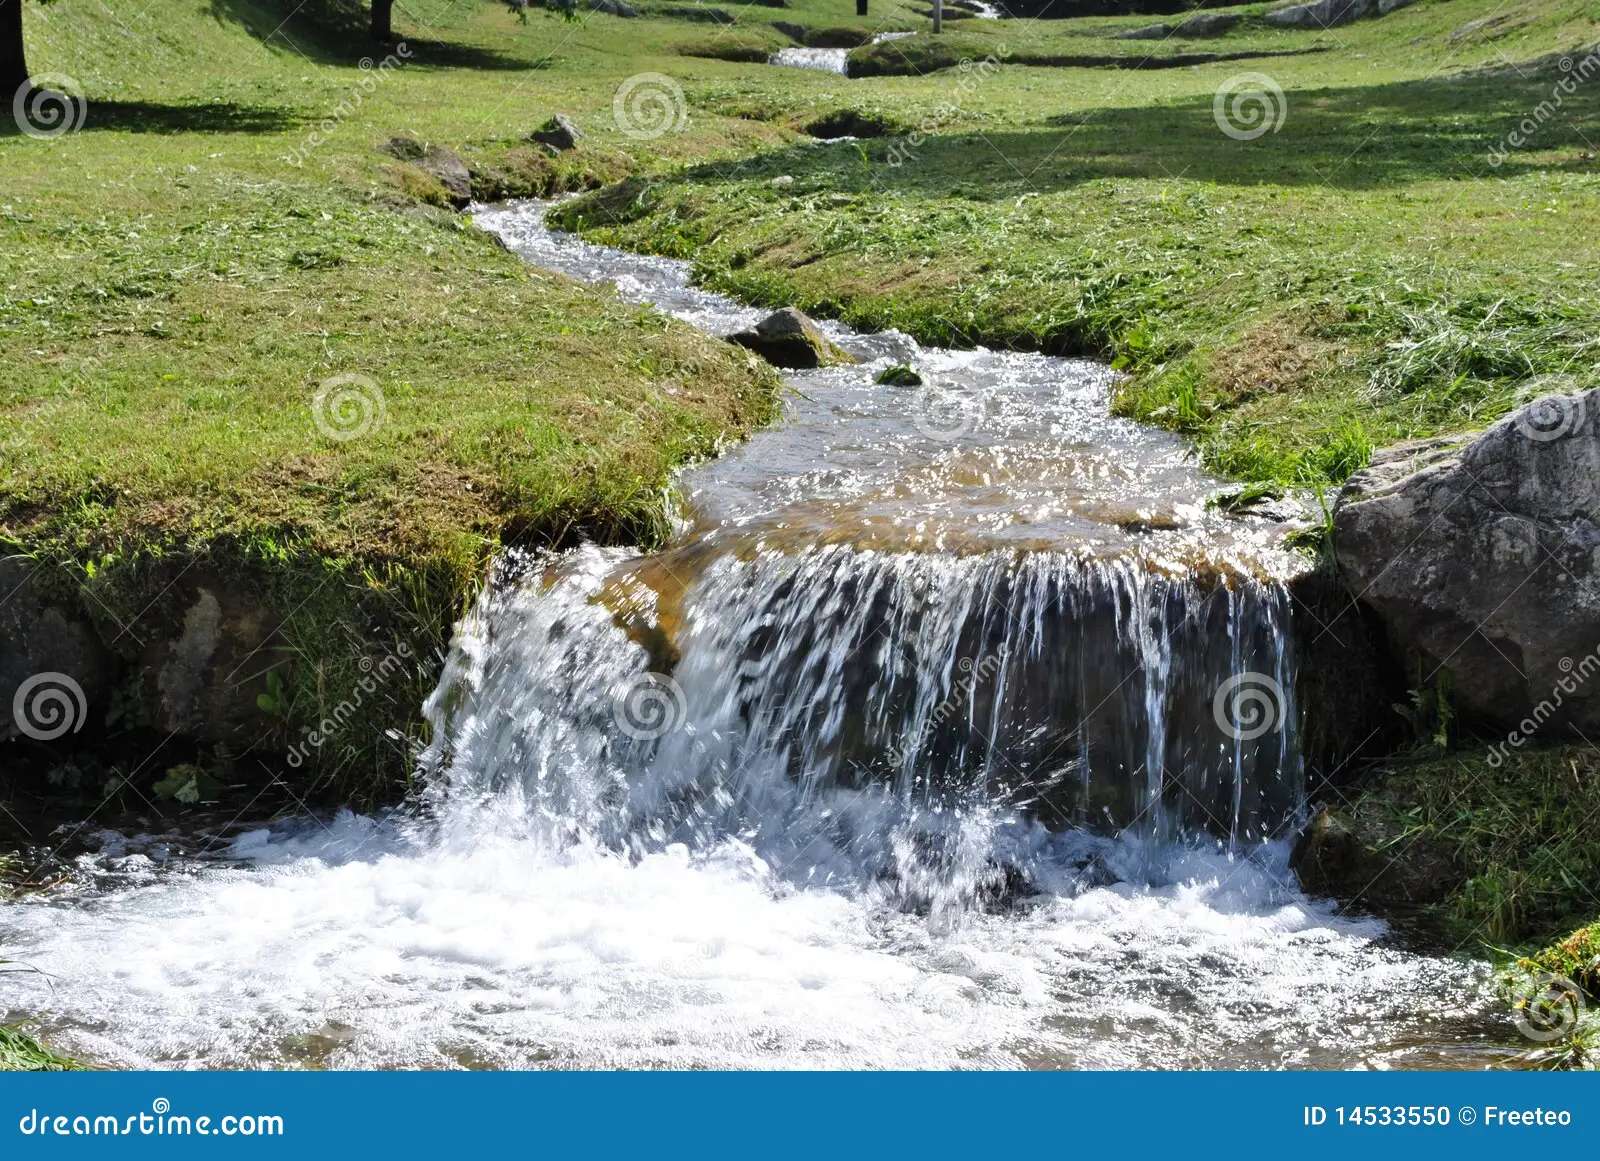 A small waterfall on a stream jigsaw puzzle online